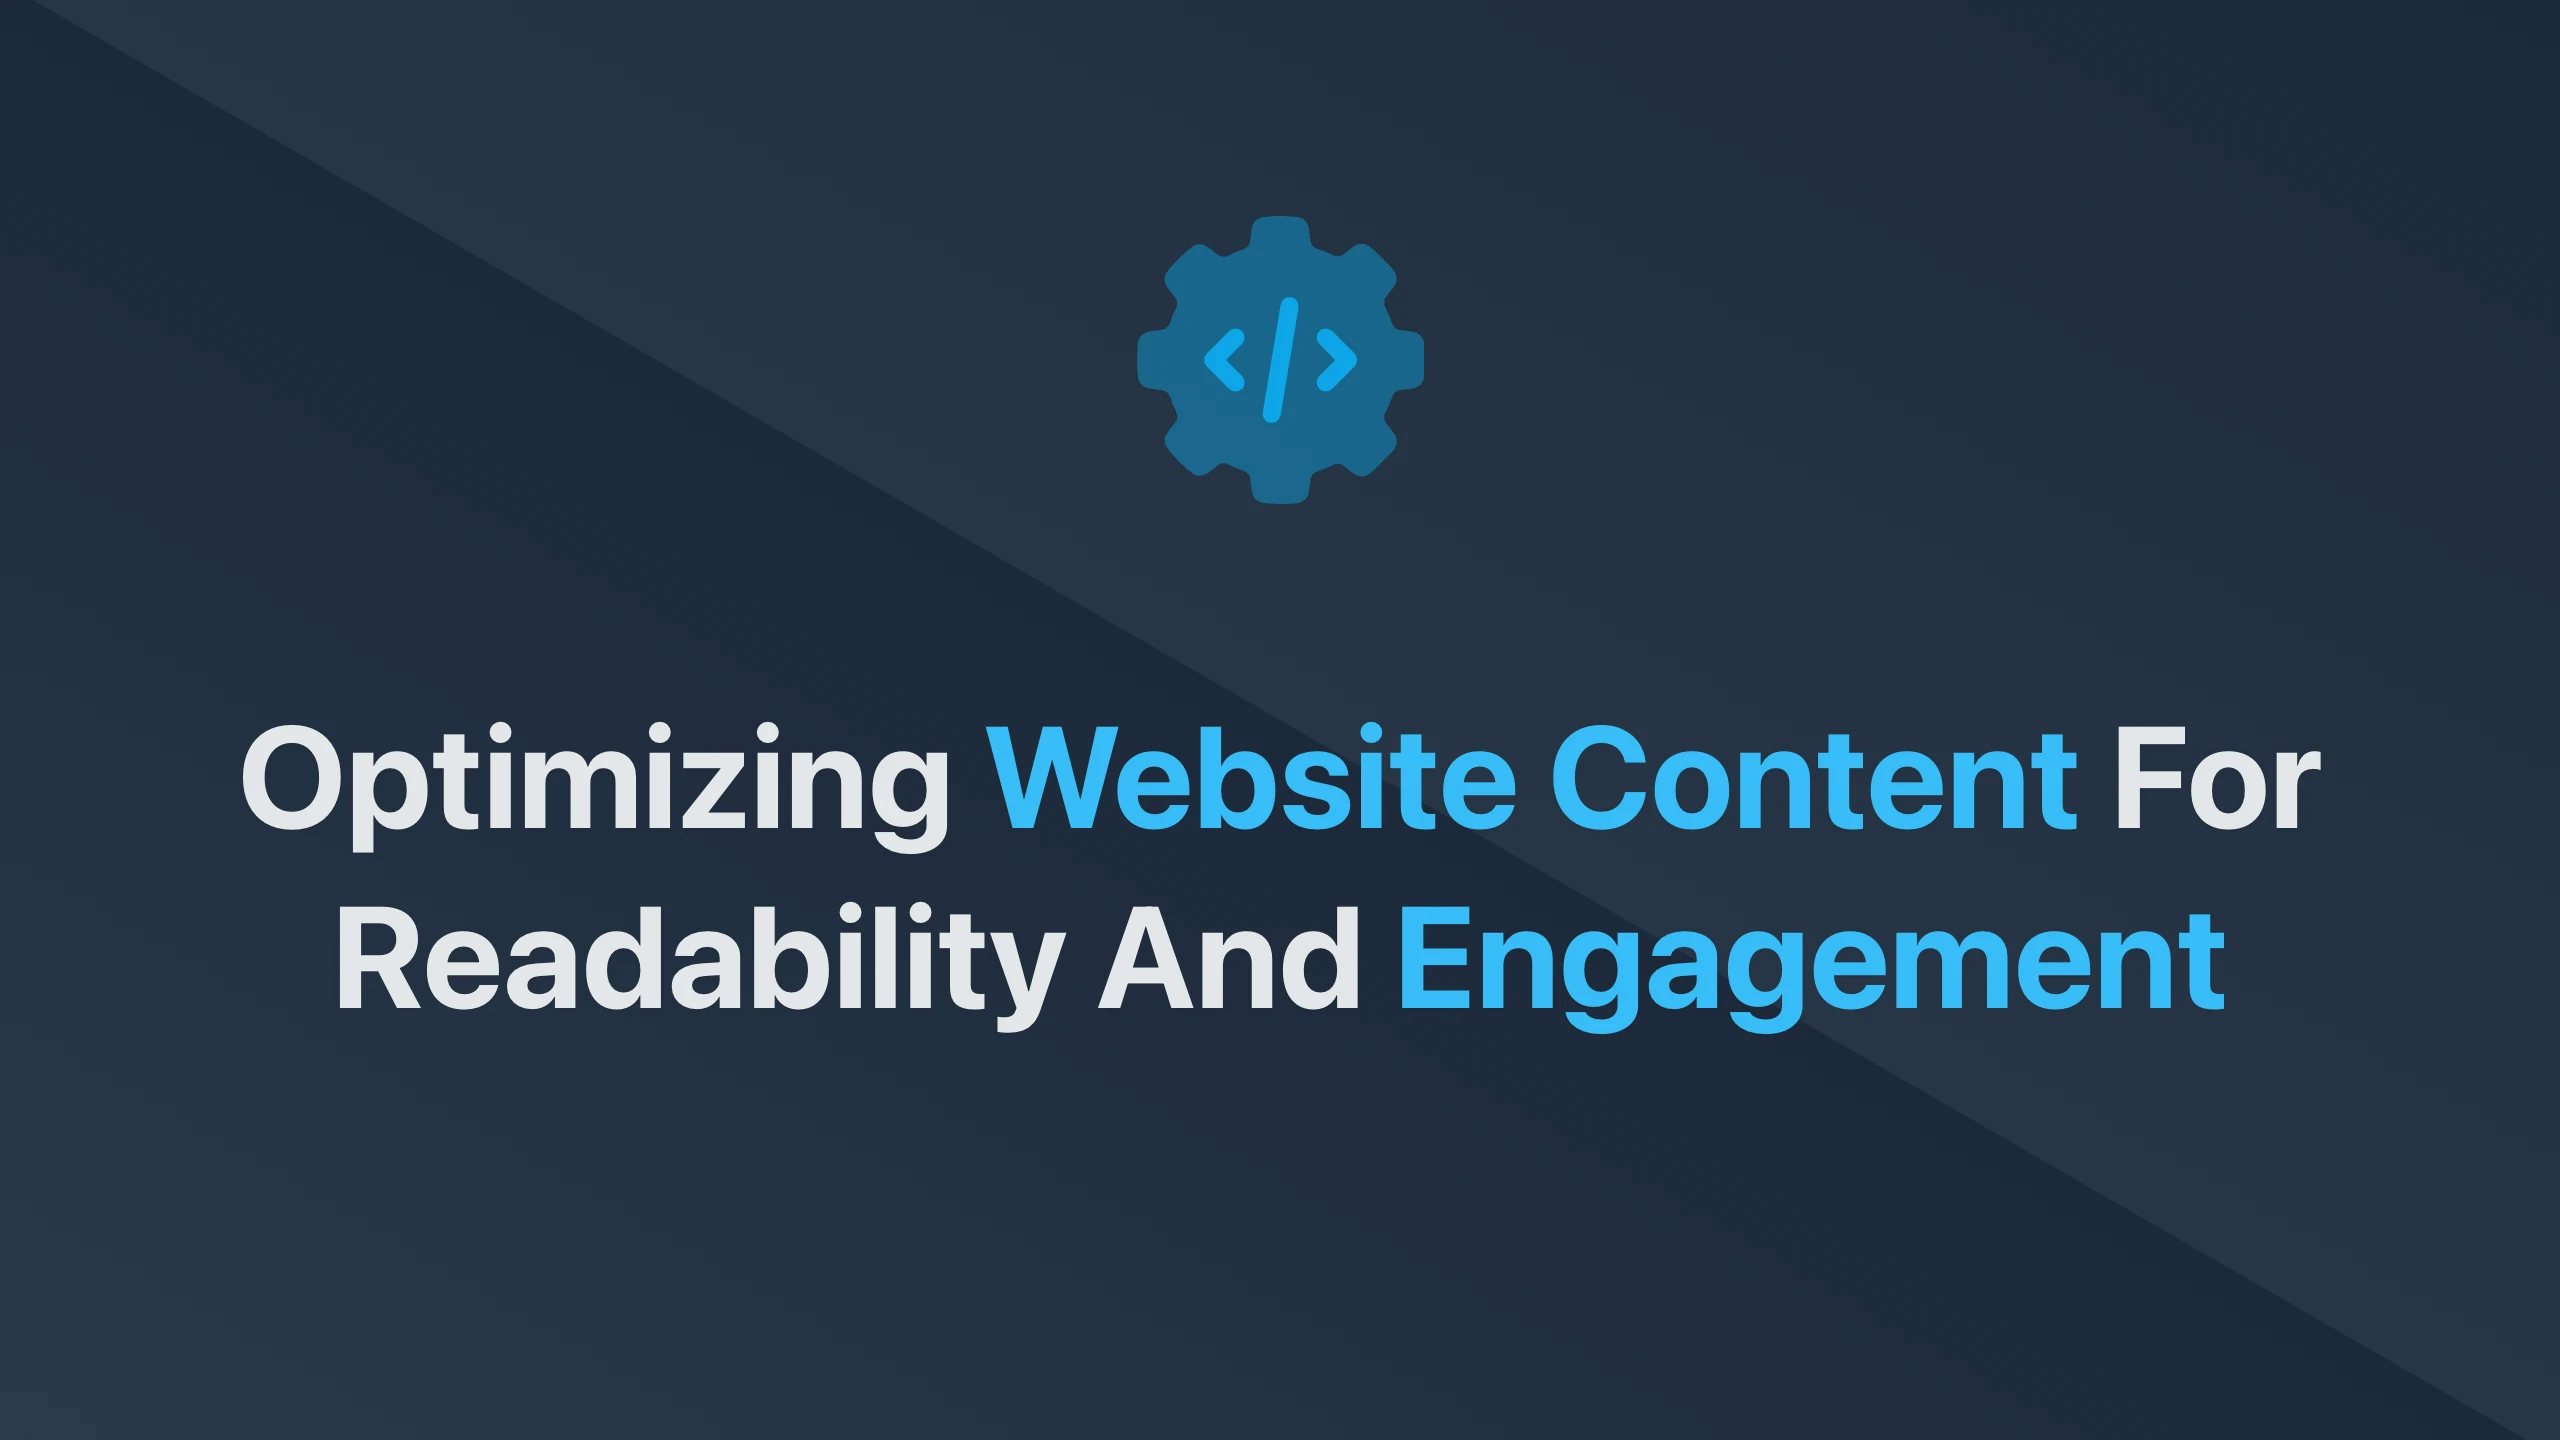 Cover Image for Optimizing Website Content for Readability and Engagement